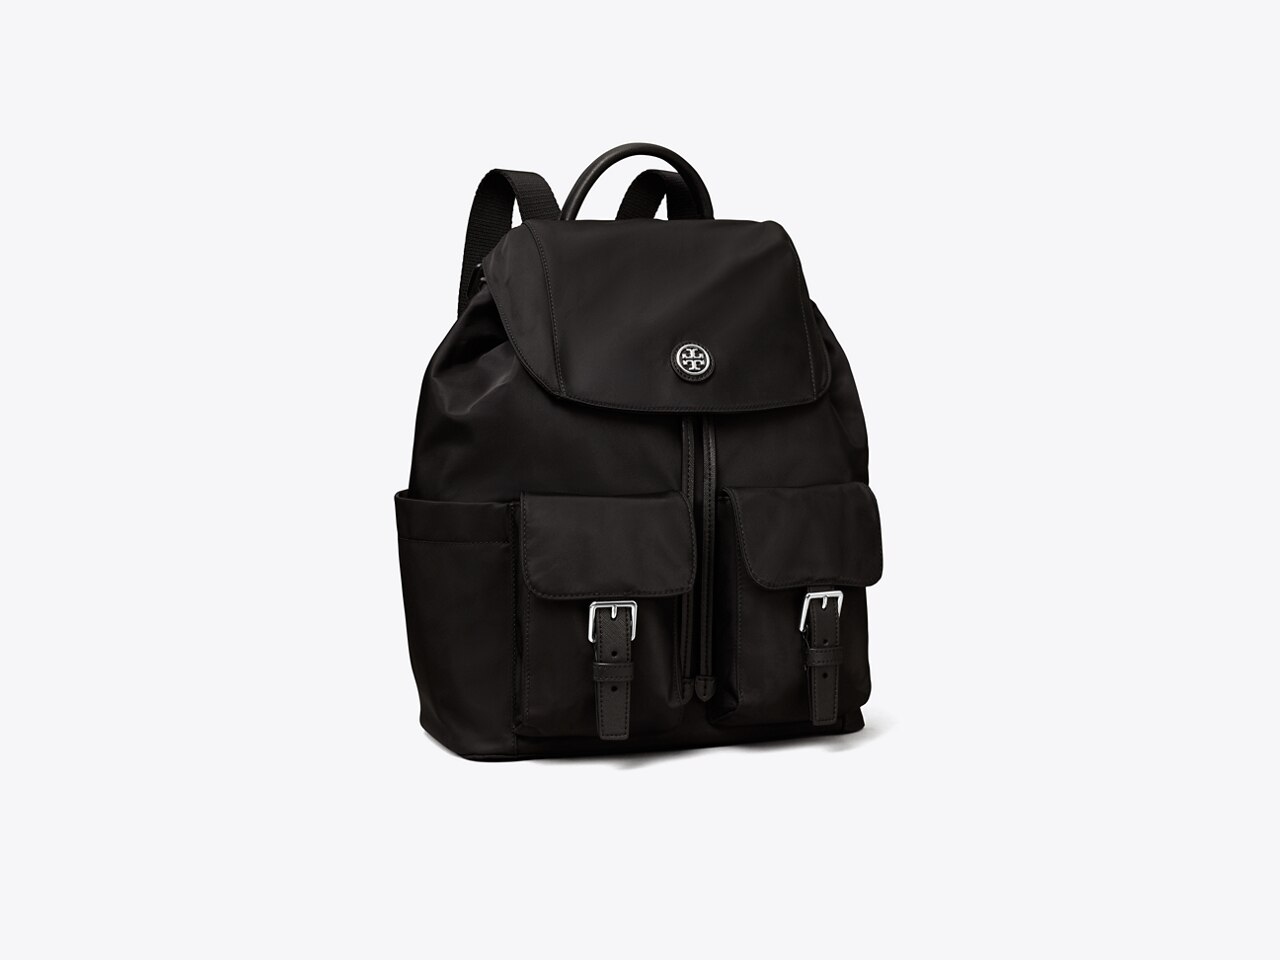 Tory Burch - Black Leather Backpack